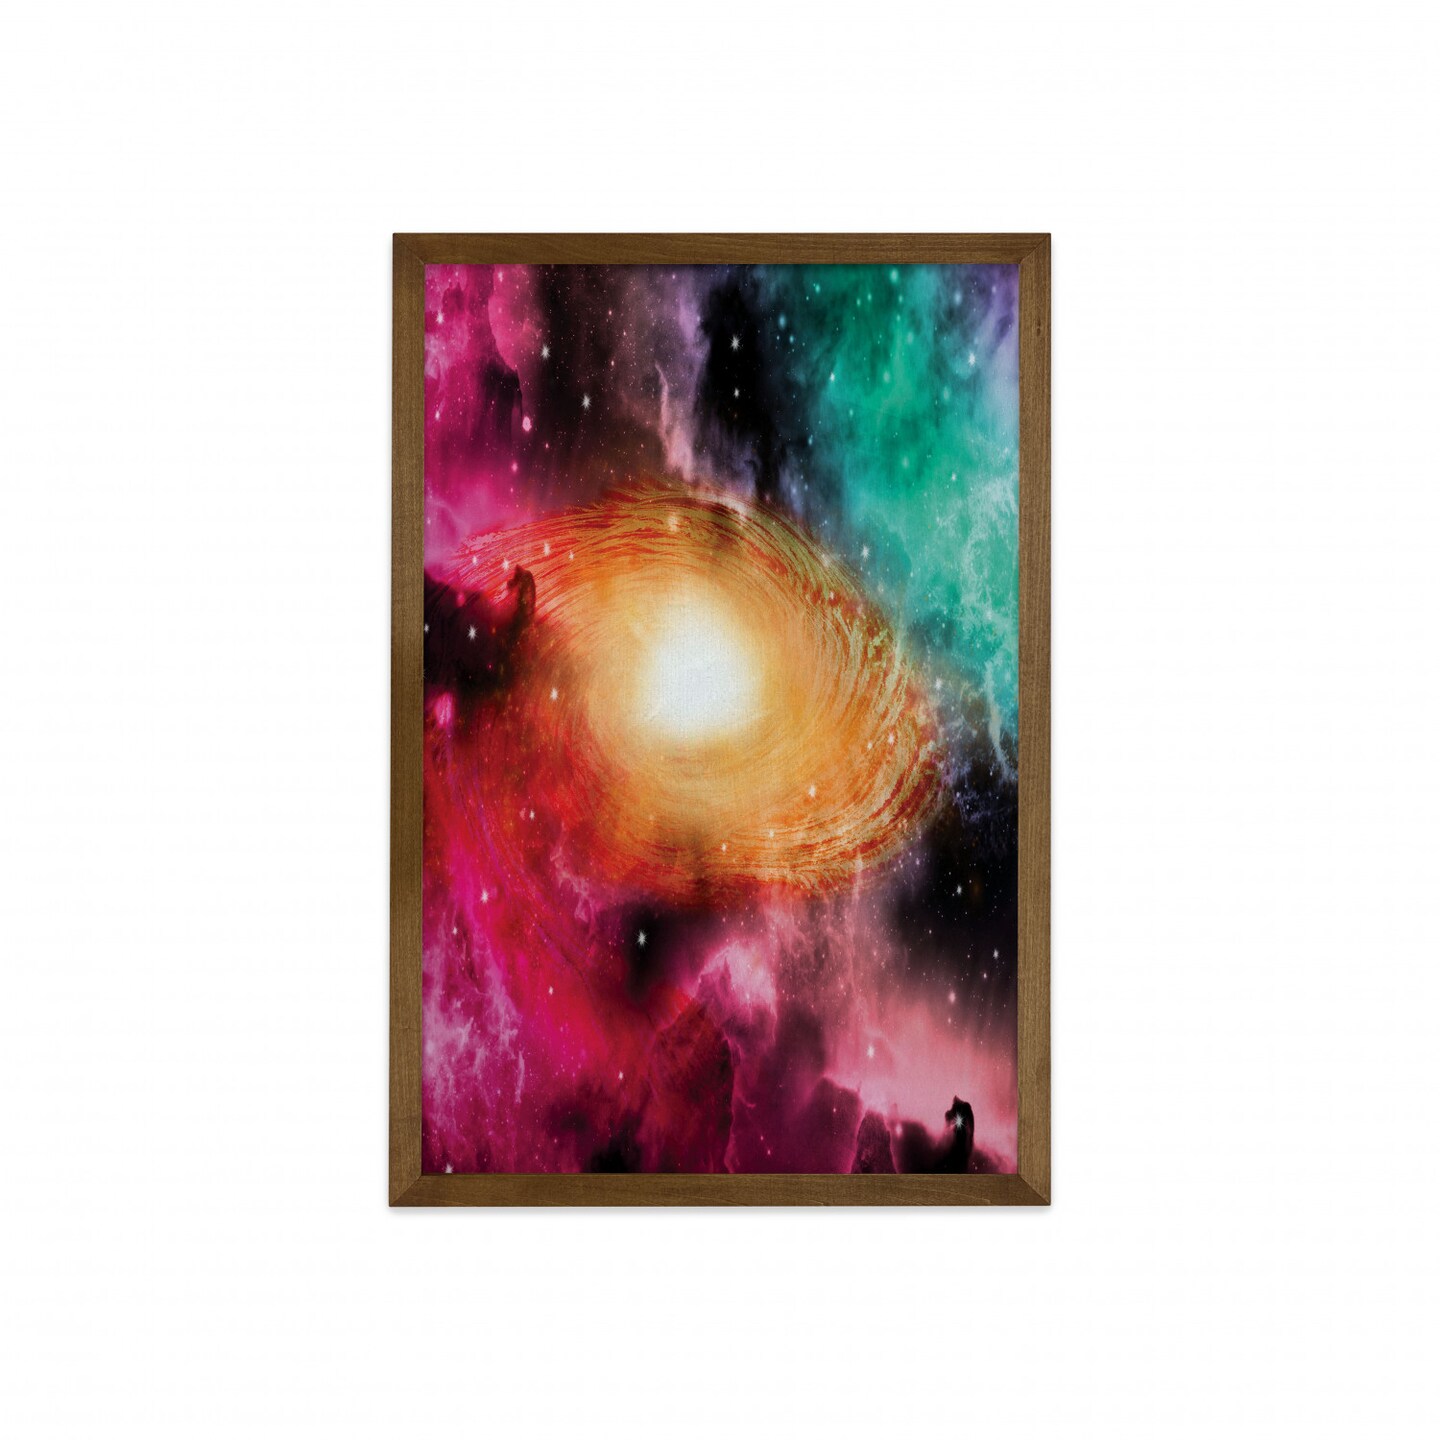 pink and orange colorful galaxy